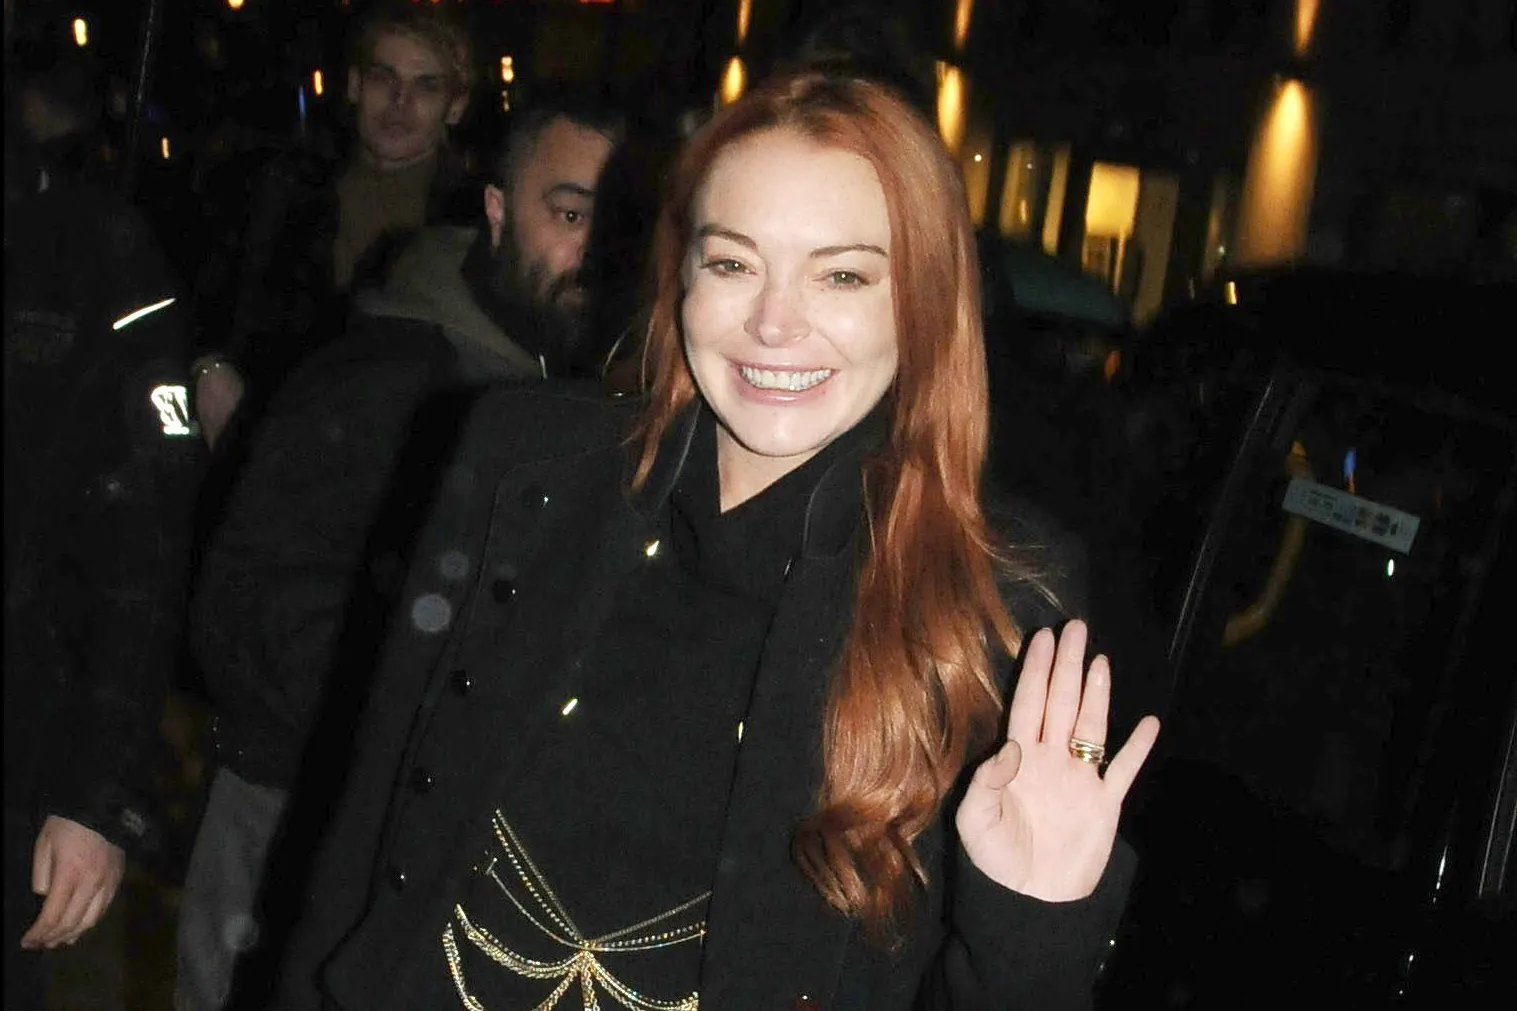 What Is Lindsay Lohan Doing for Lawyer.com? Here’s What She Told Us About Her New Side Gig